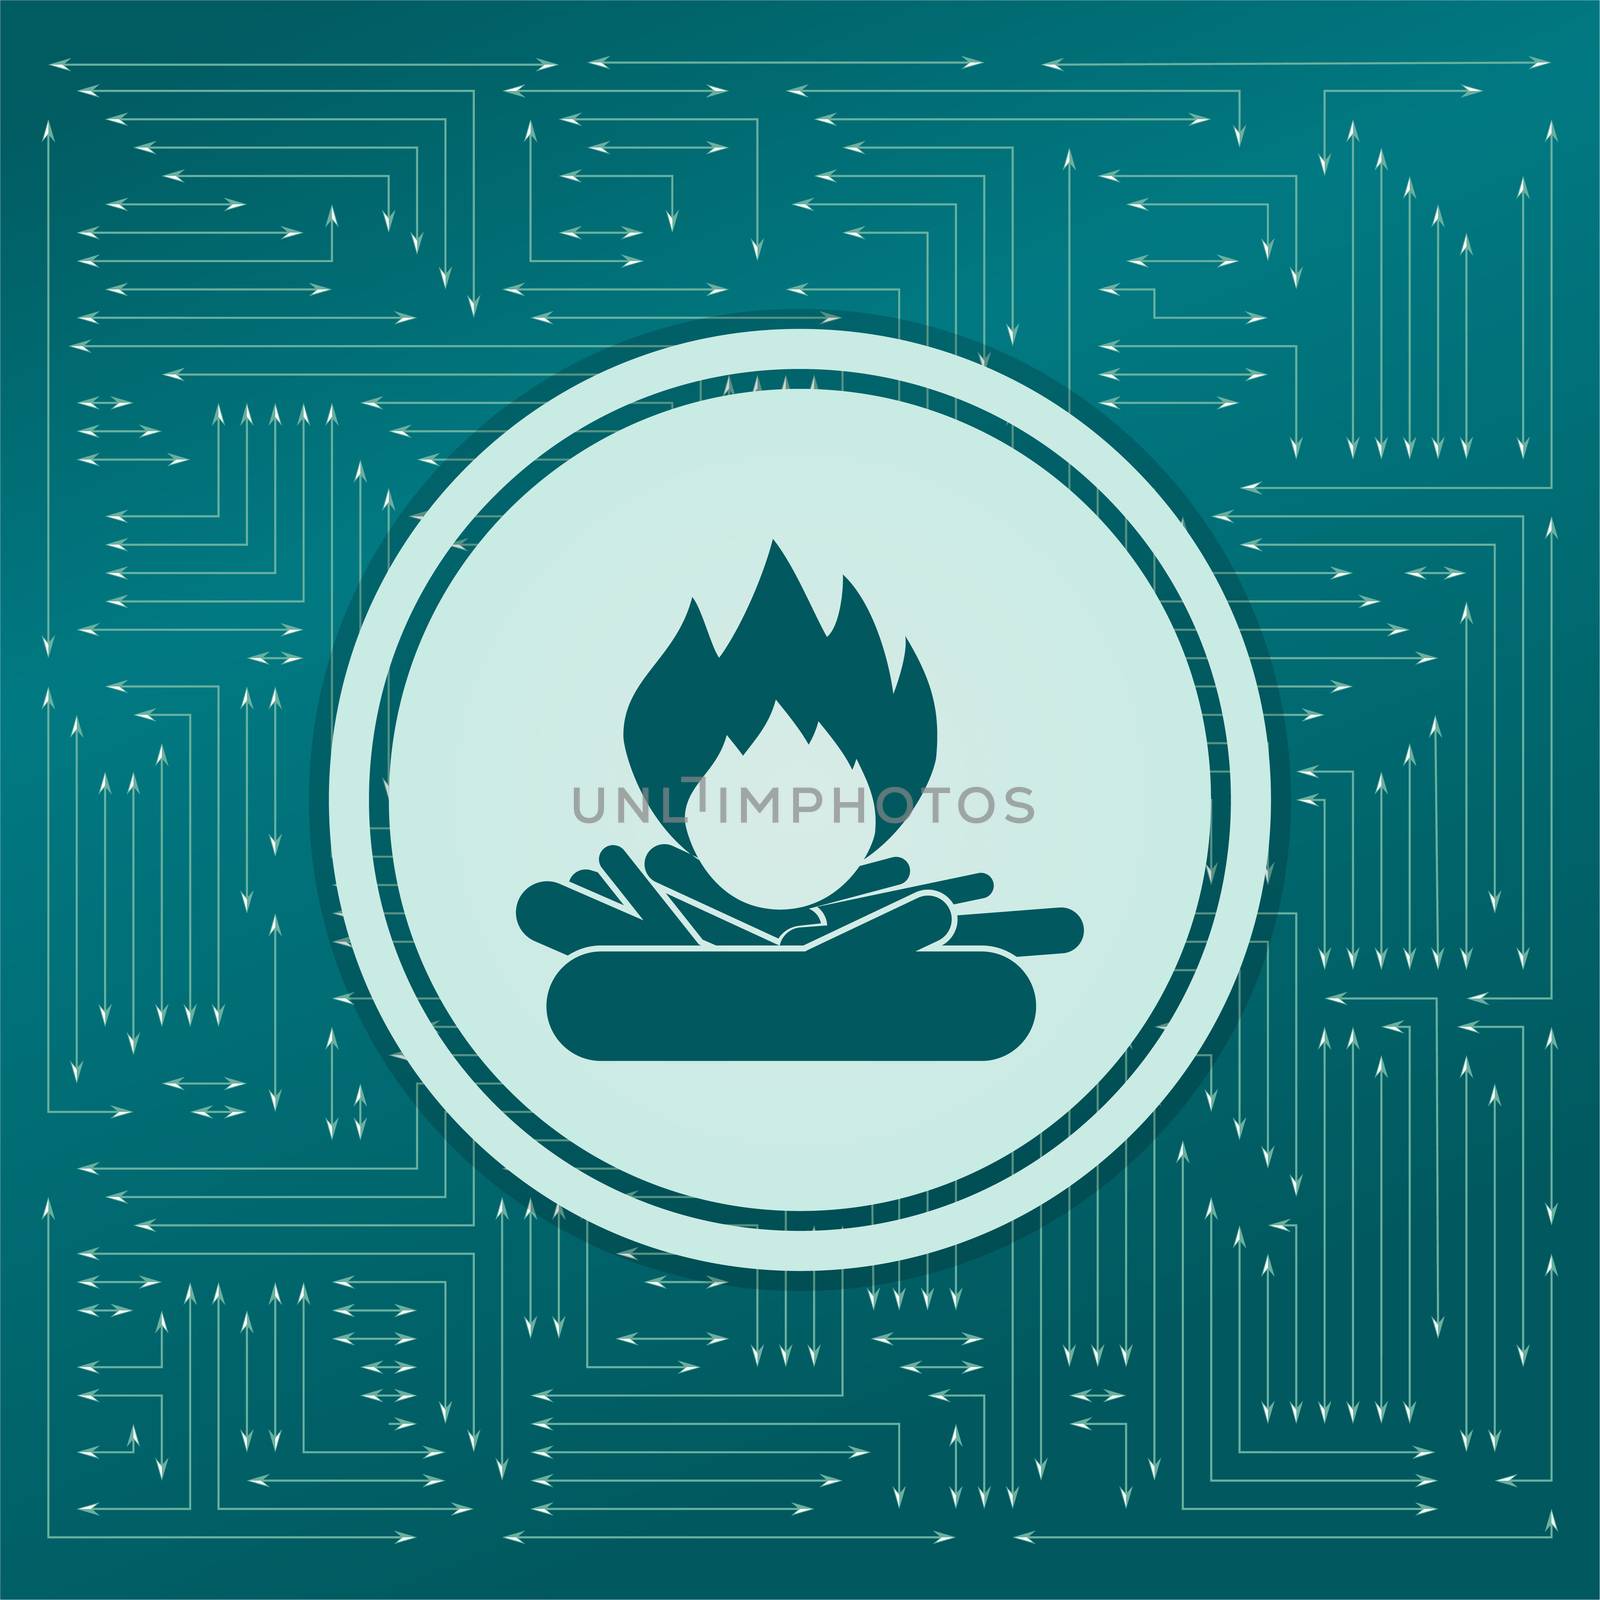 Fire Icon on a green background, with arrows in different directions. It appears on the electronic board. illustration